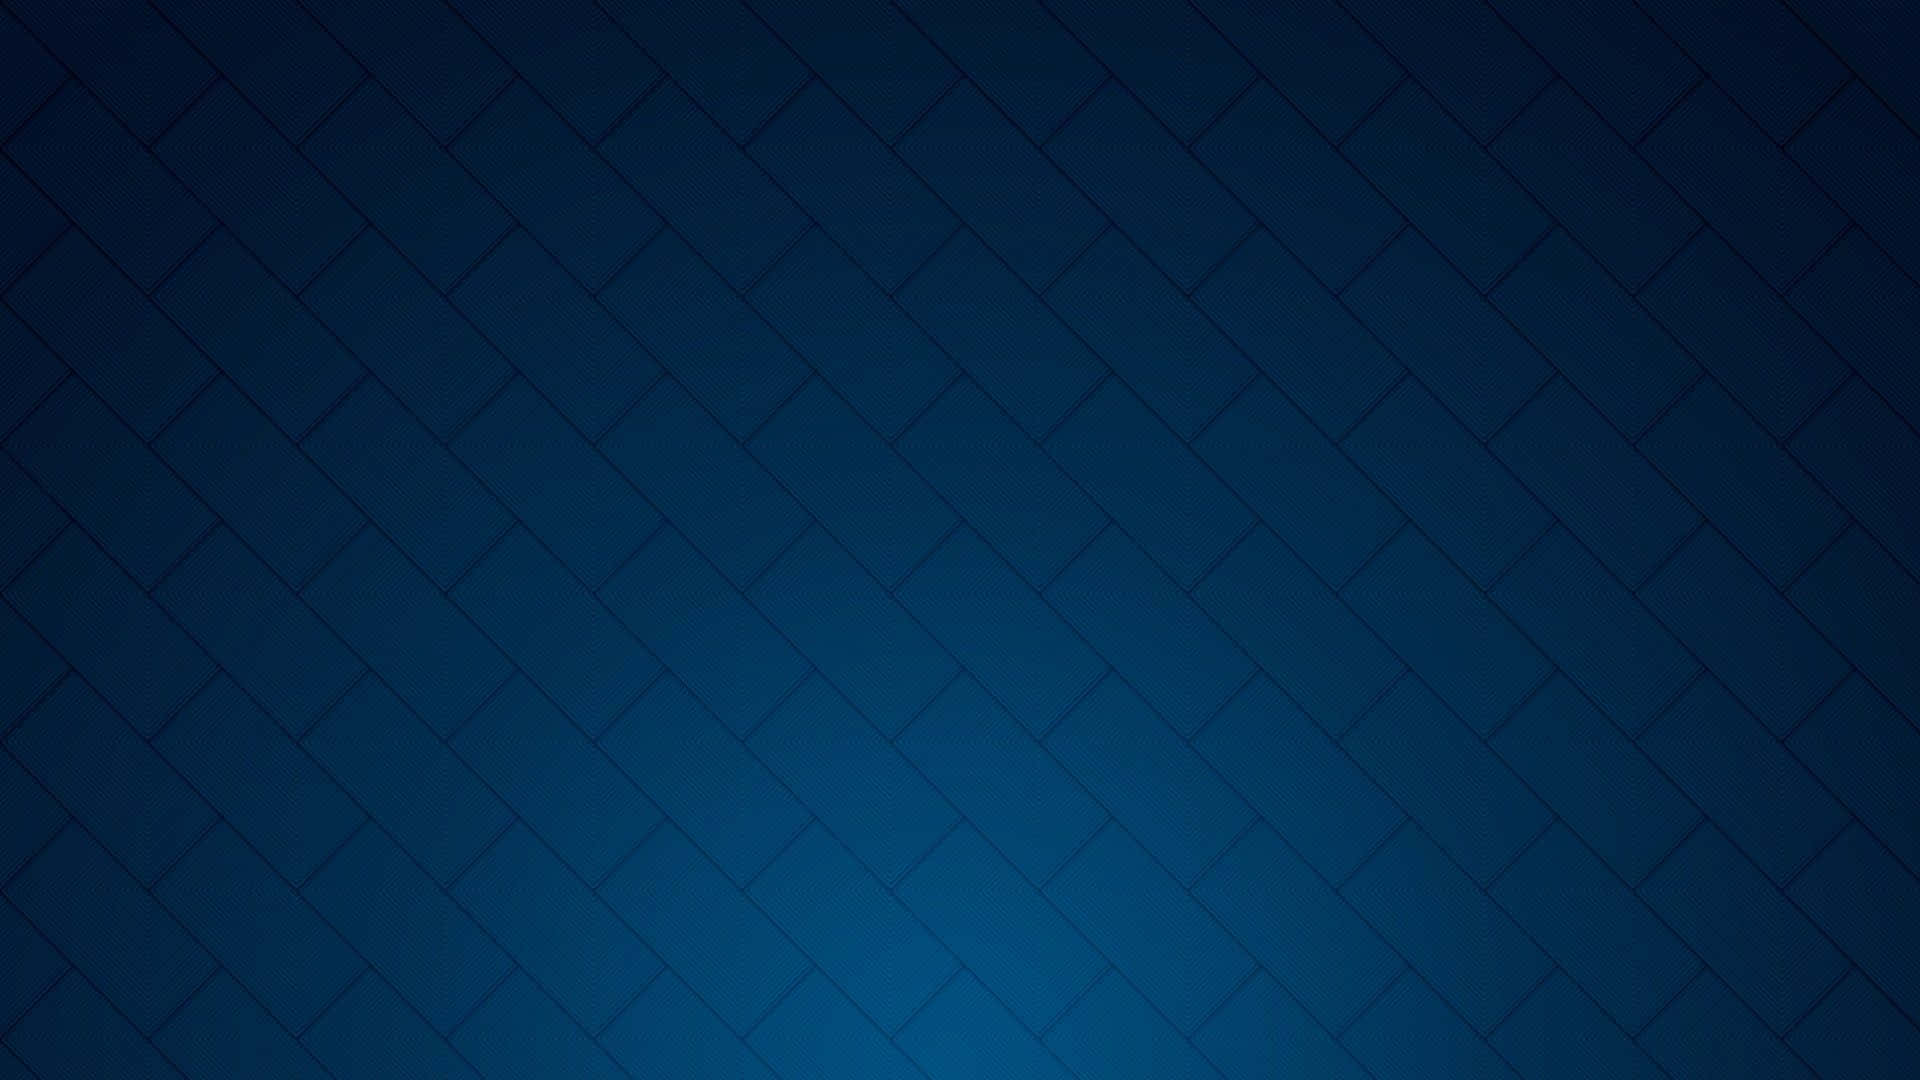 Pleasant Shades Of Blue Gradient Background